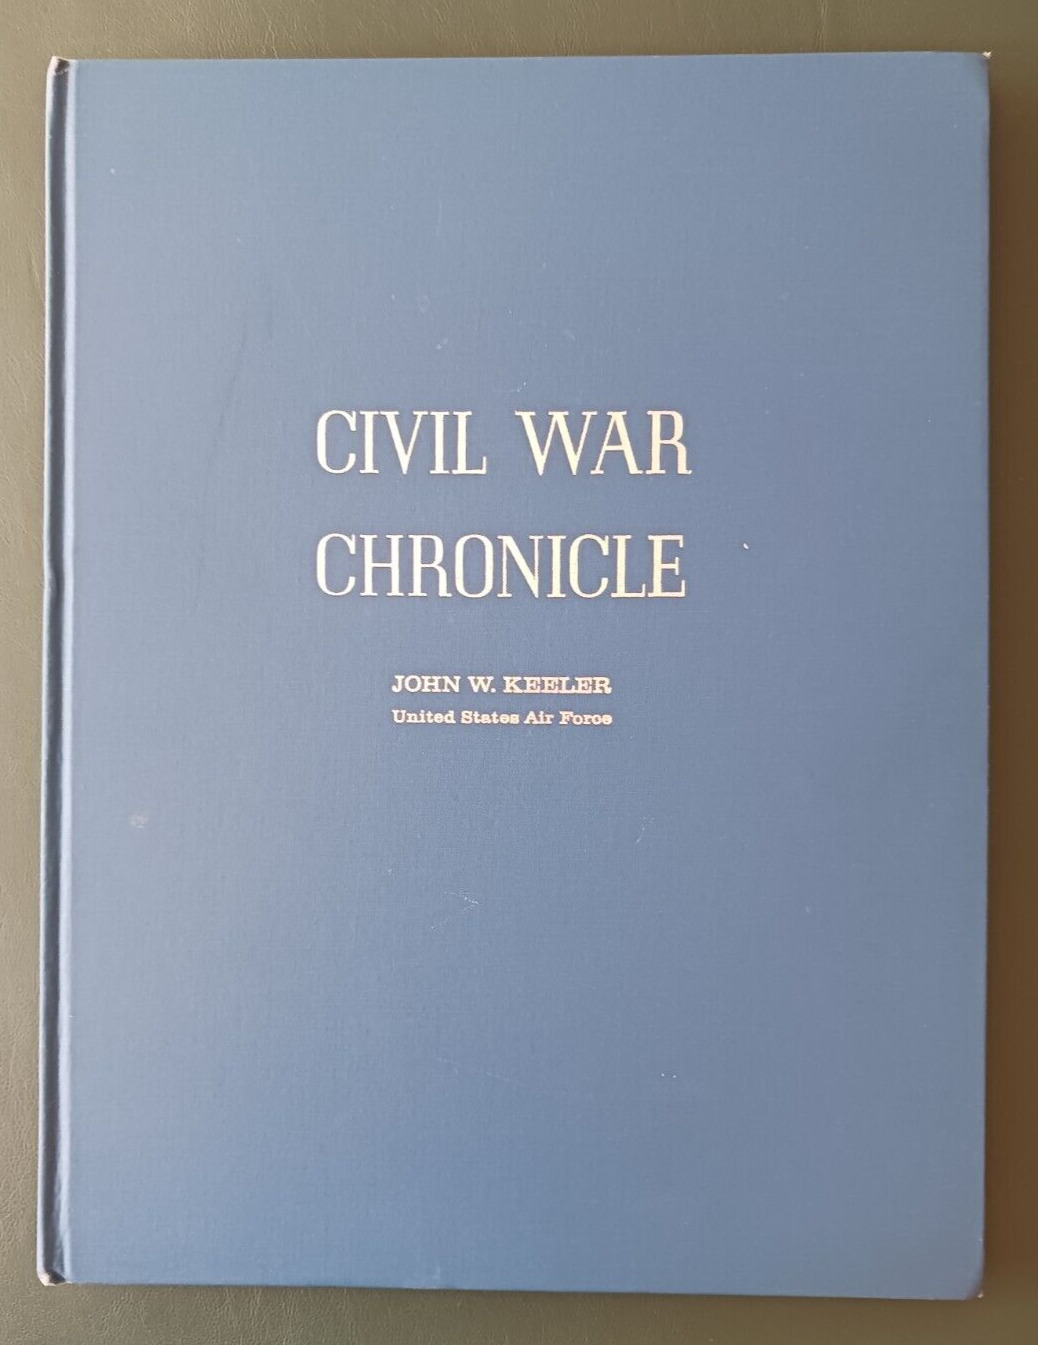 Civil War Chronicle - The War Between the States - by John W. Keeler 1967 -RARE